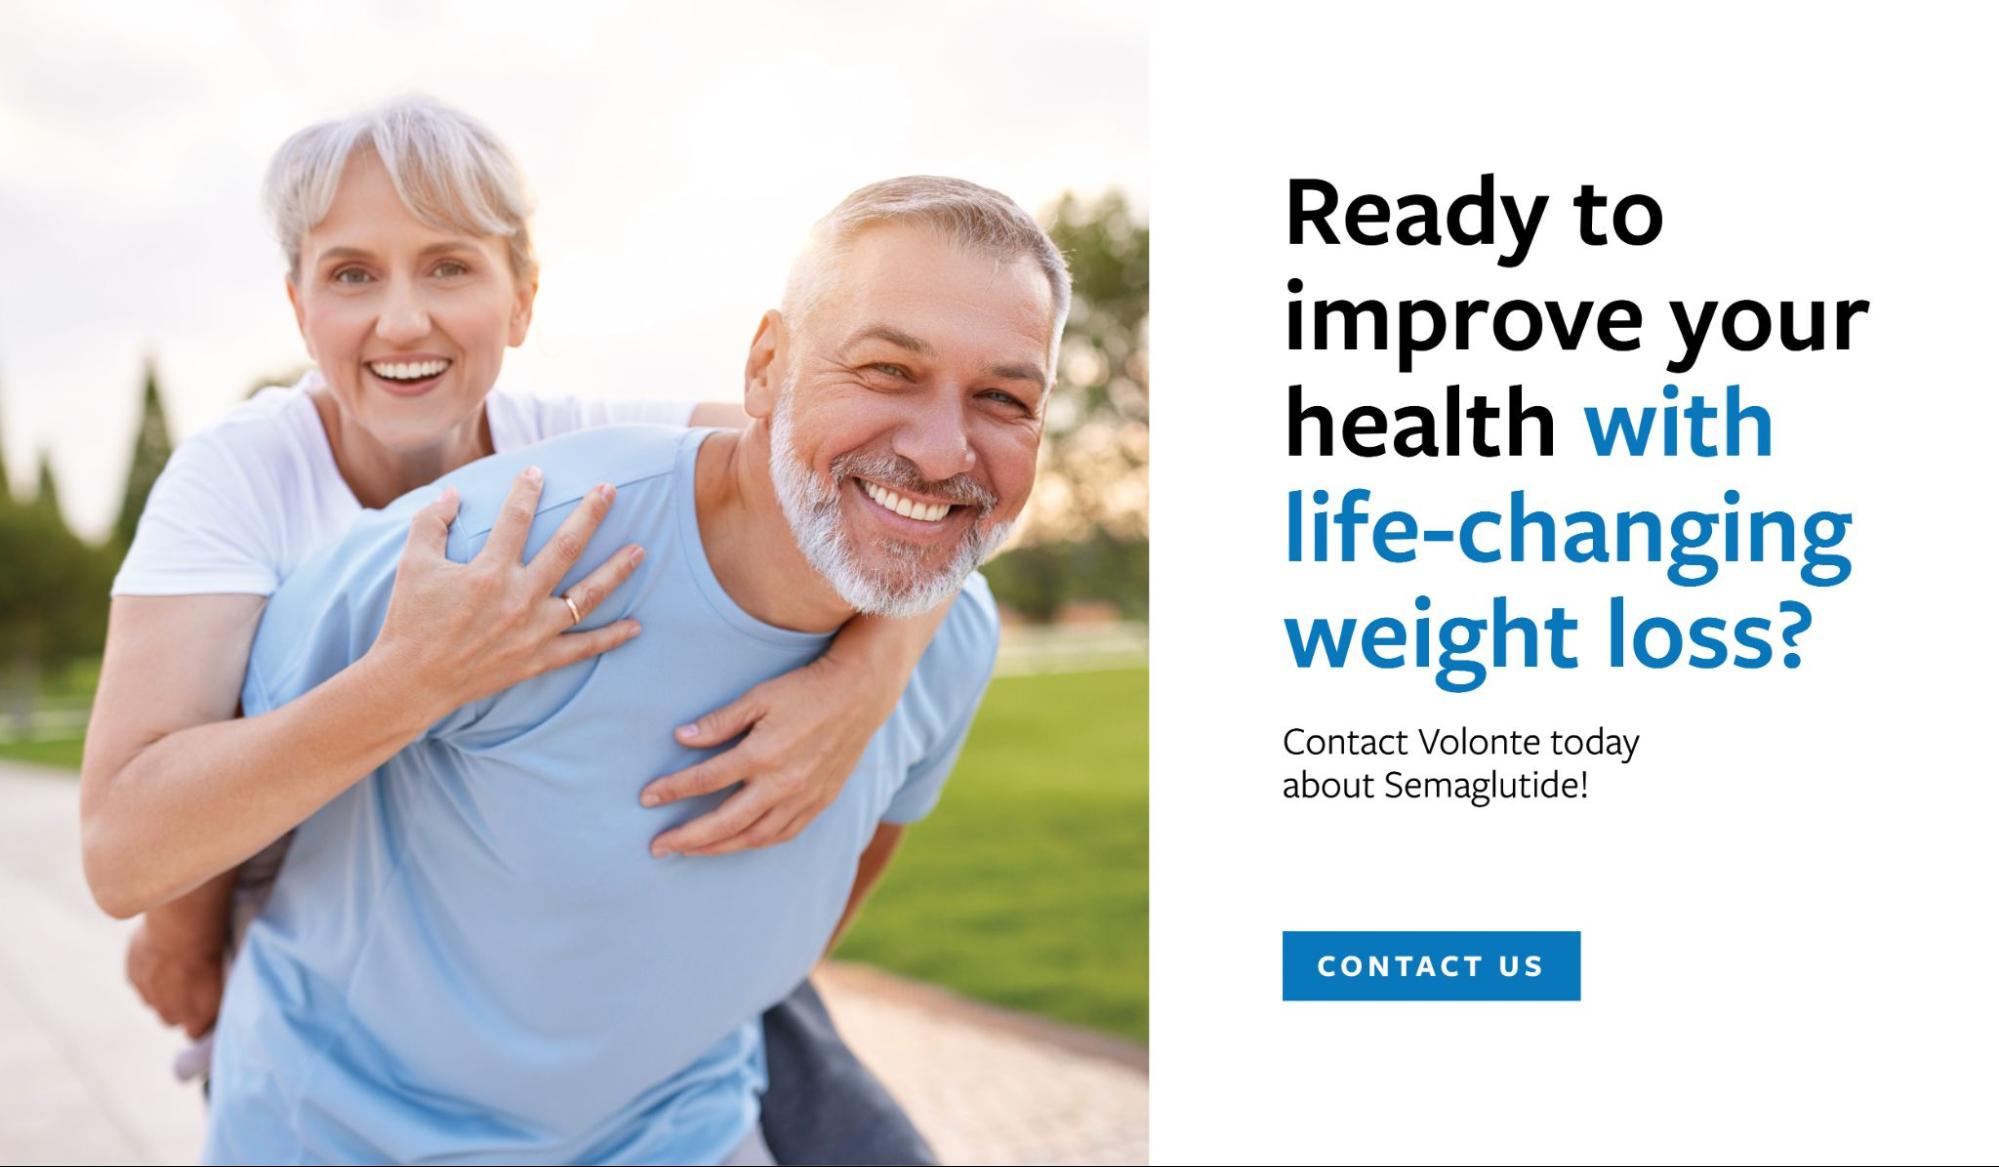 Ready to improve your health with life-changing weight loss? Contact Volonte today about Semaglutide!